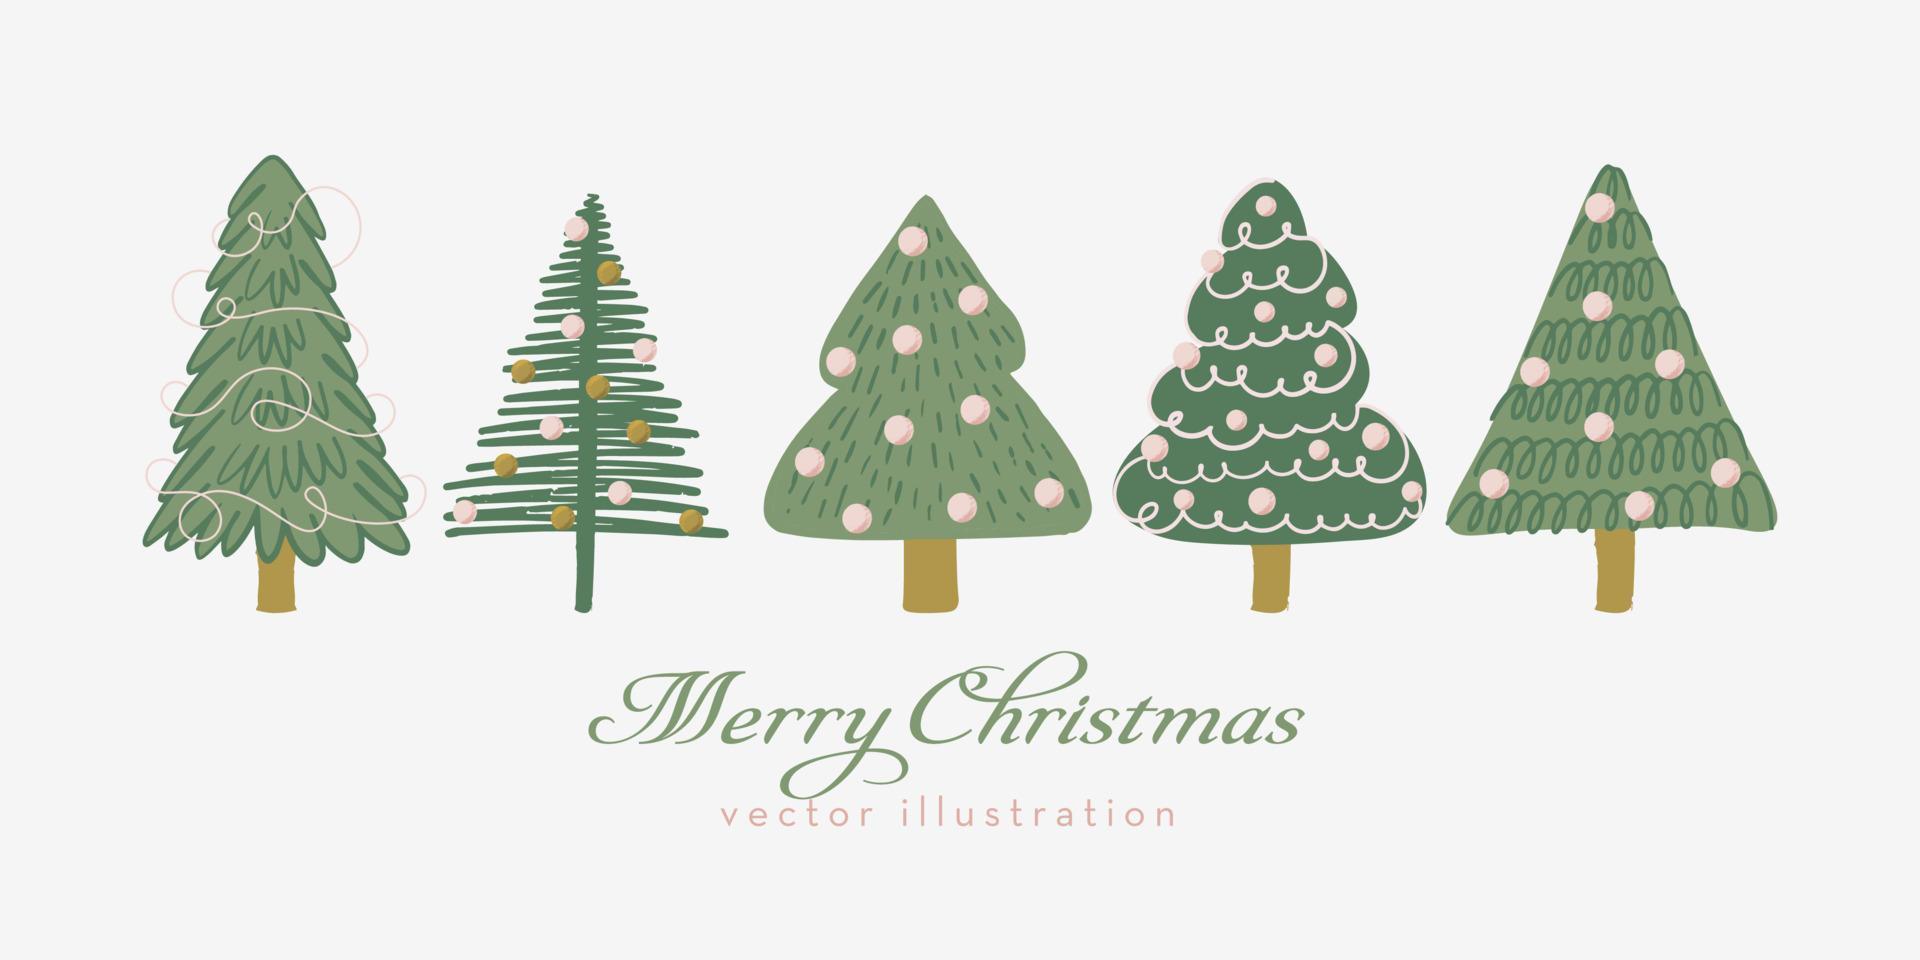 Christmas decorated tree, Spruce fir, or pine tree set. Vector illustration in hand-drawn doodle style